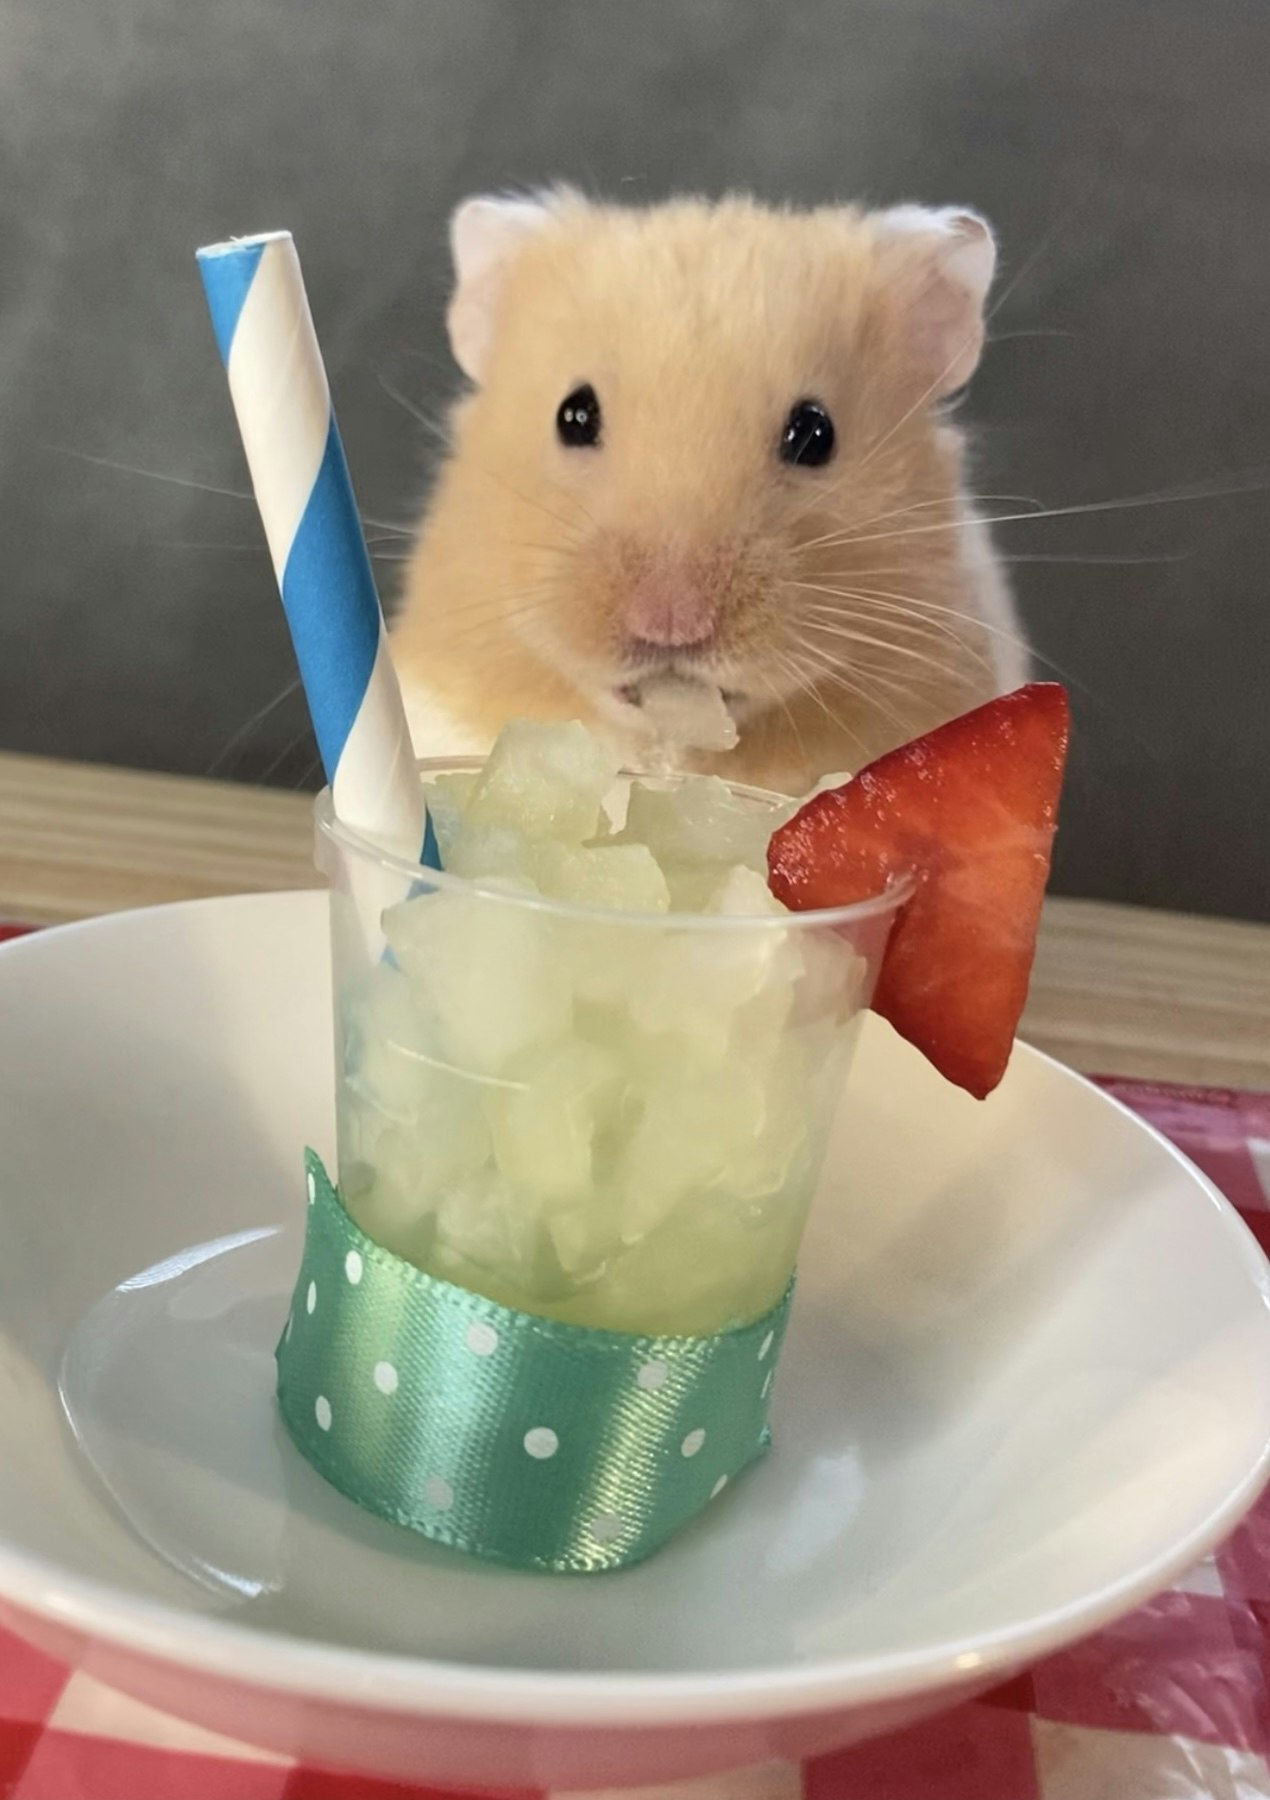 The very hungry hamster